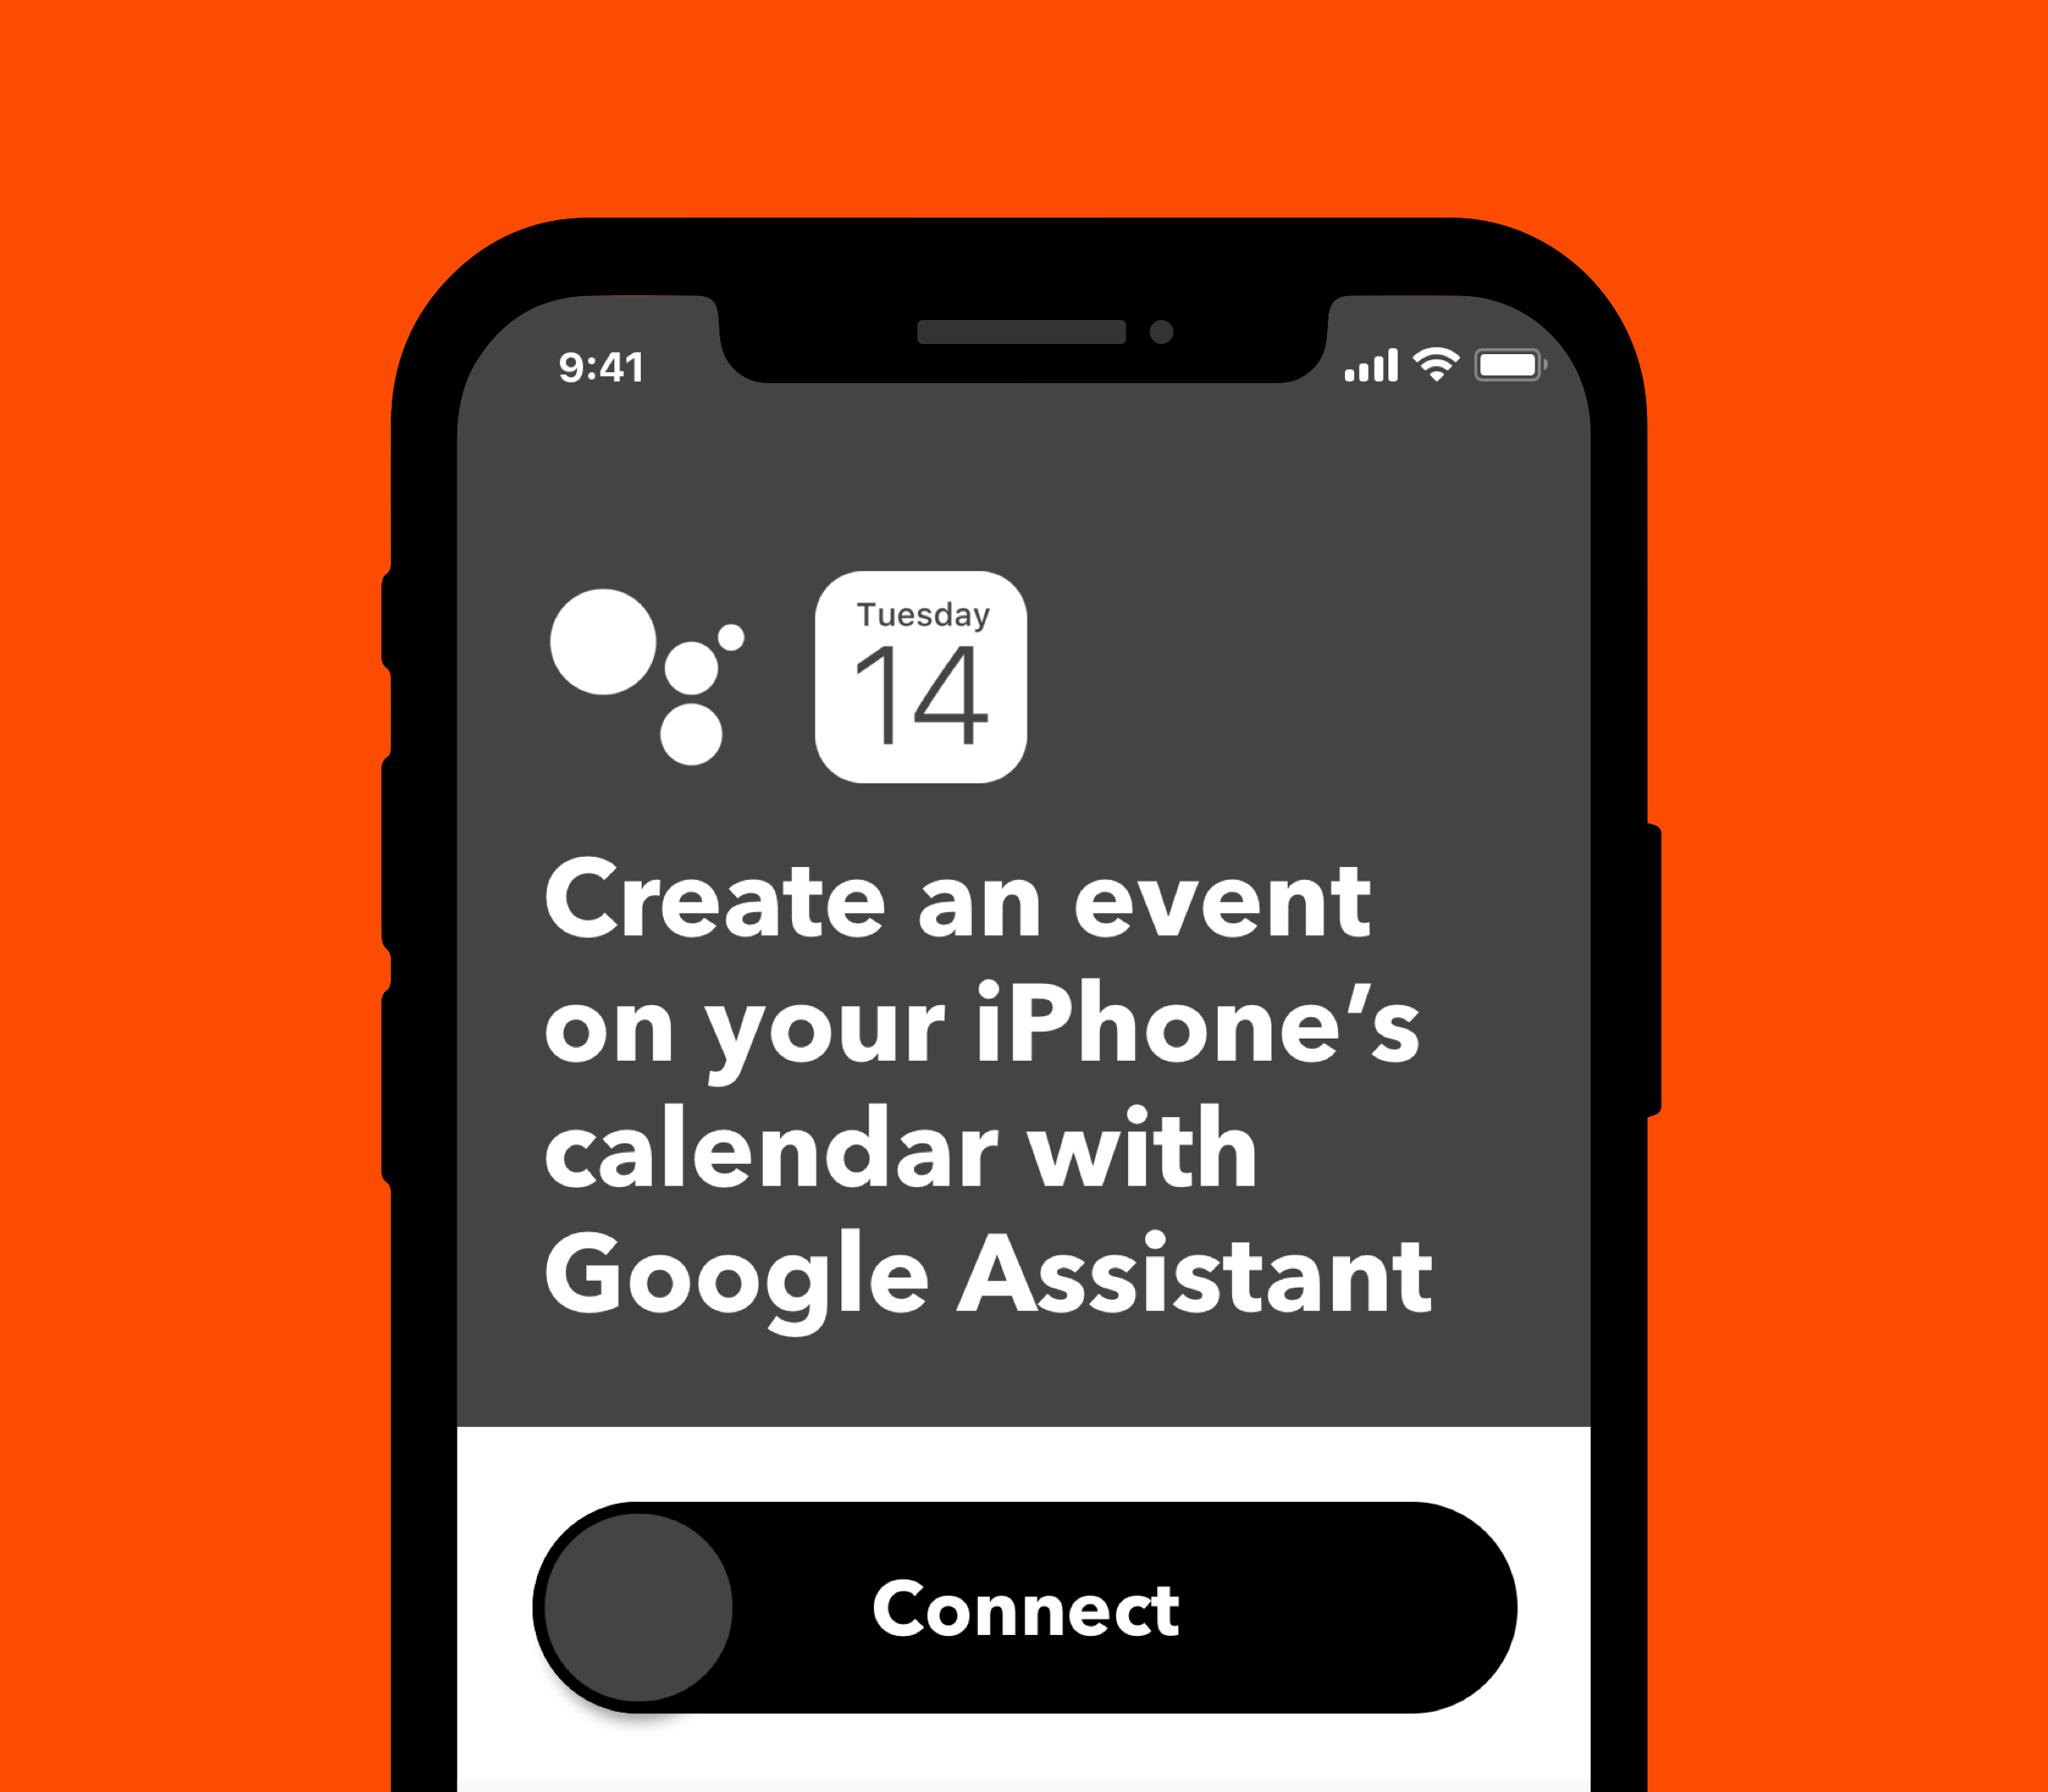 Connect Google Assistant to your iPhone